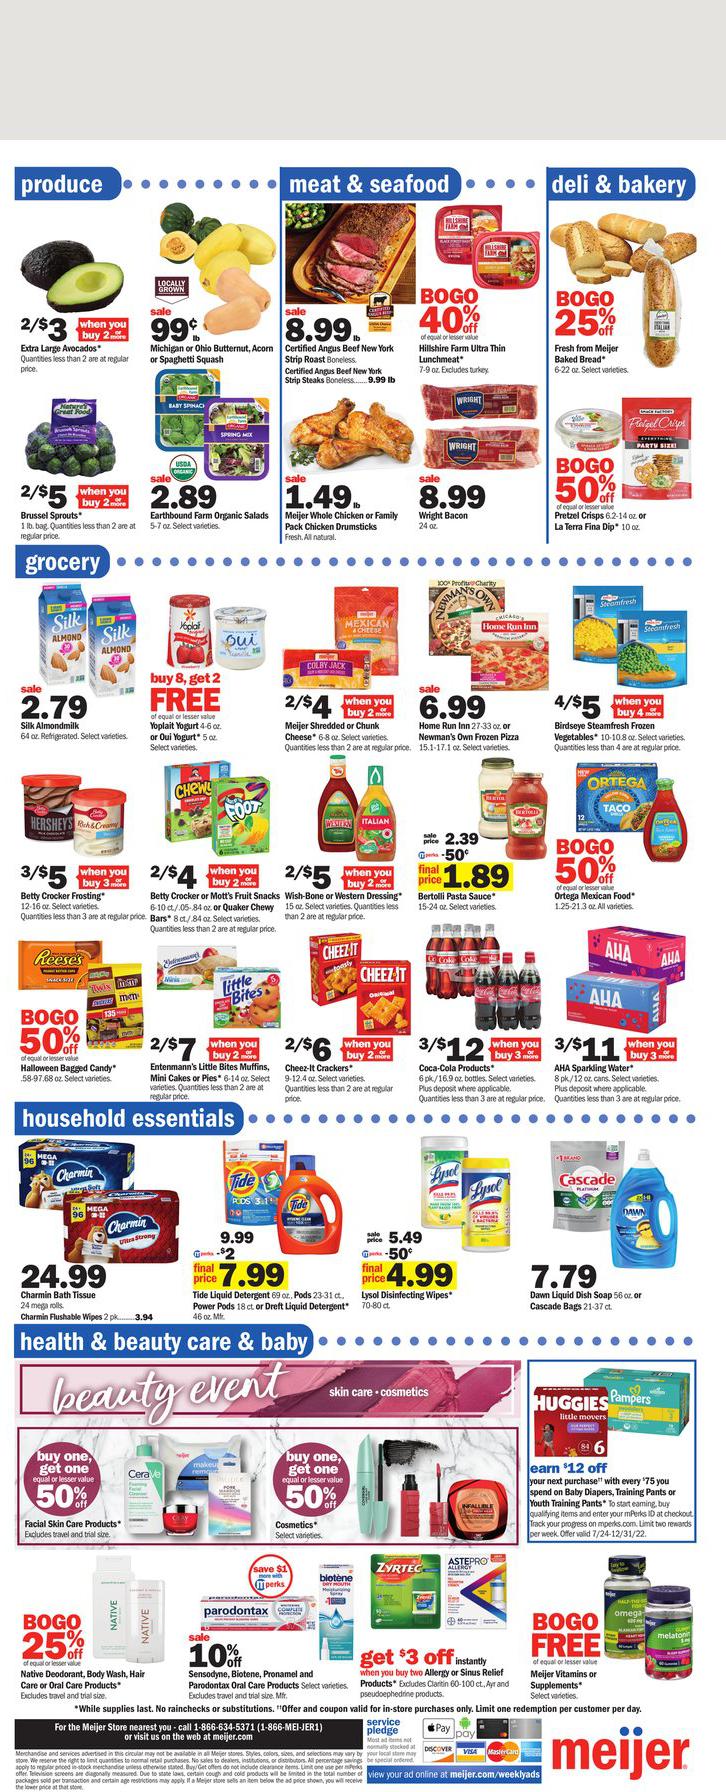 25.09.2022 Meijer ad 4. page